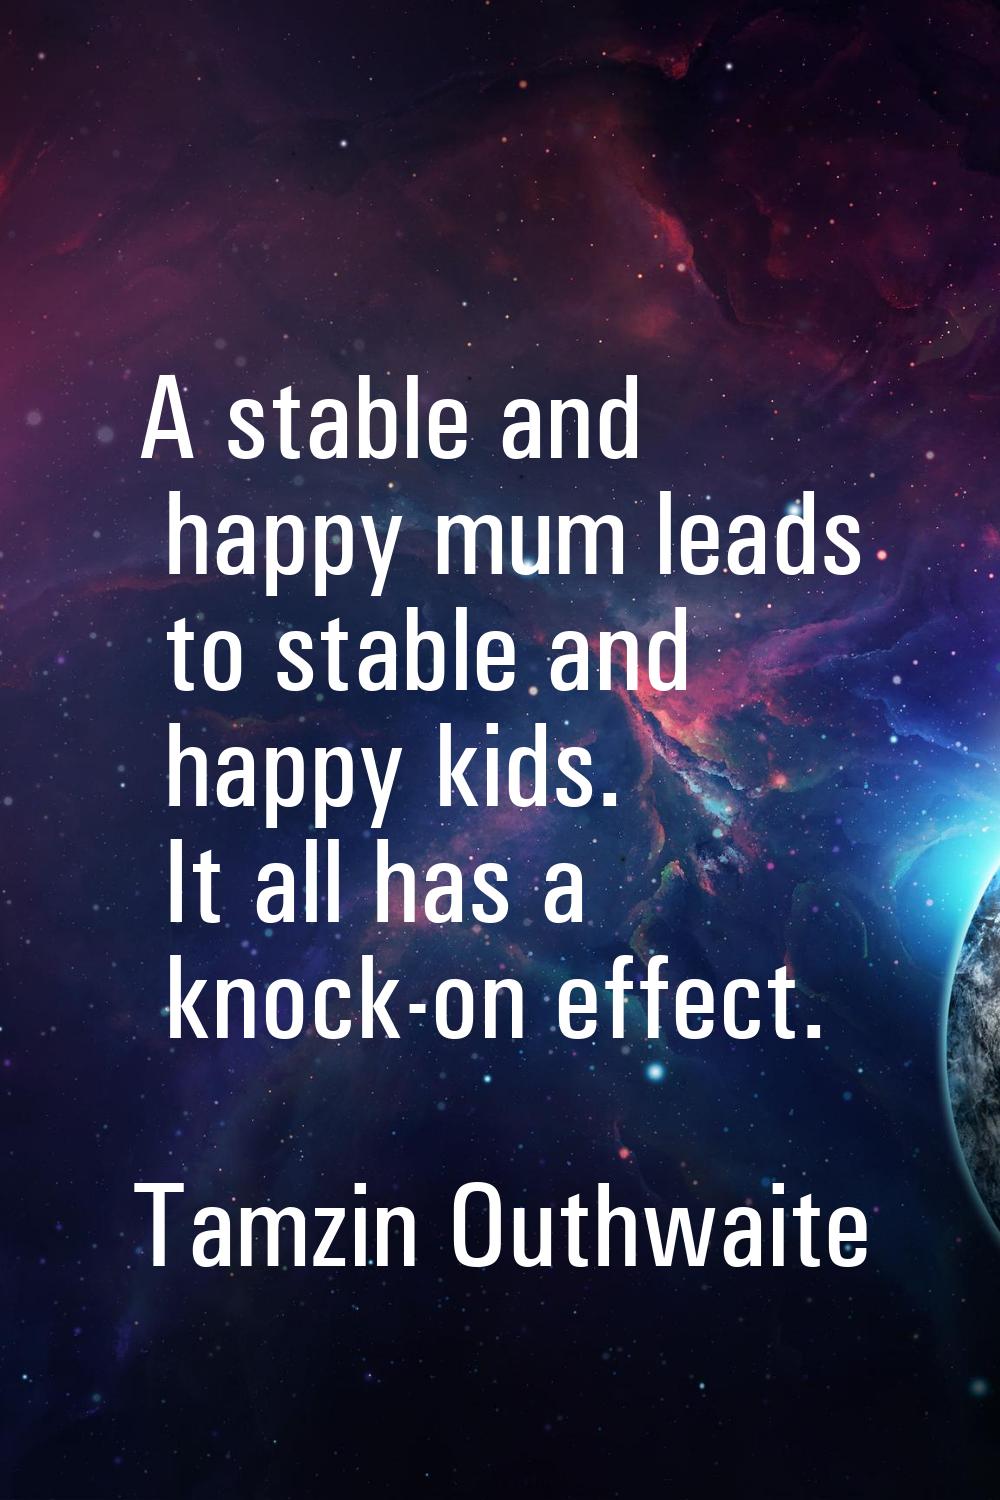 A stable and happy mum leads to stable and happy kids. It all has a knock-on effect.